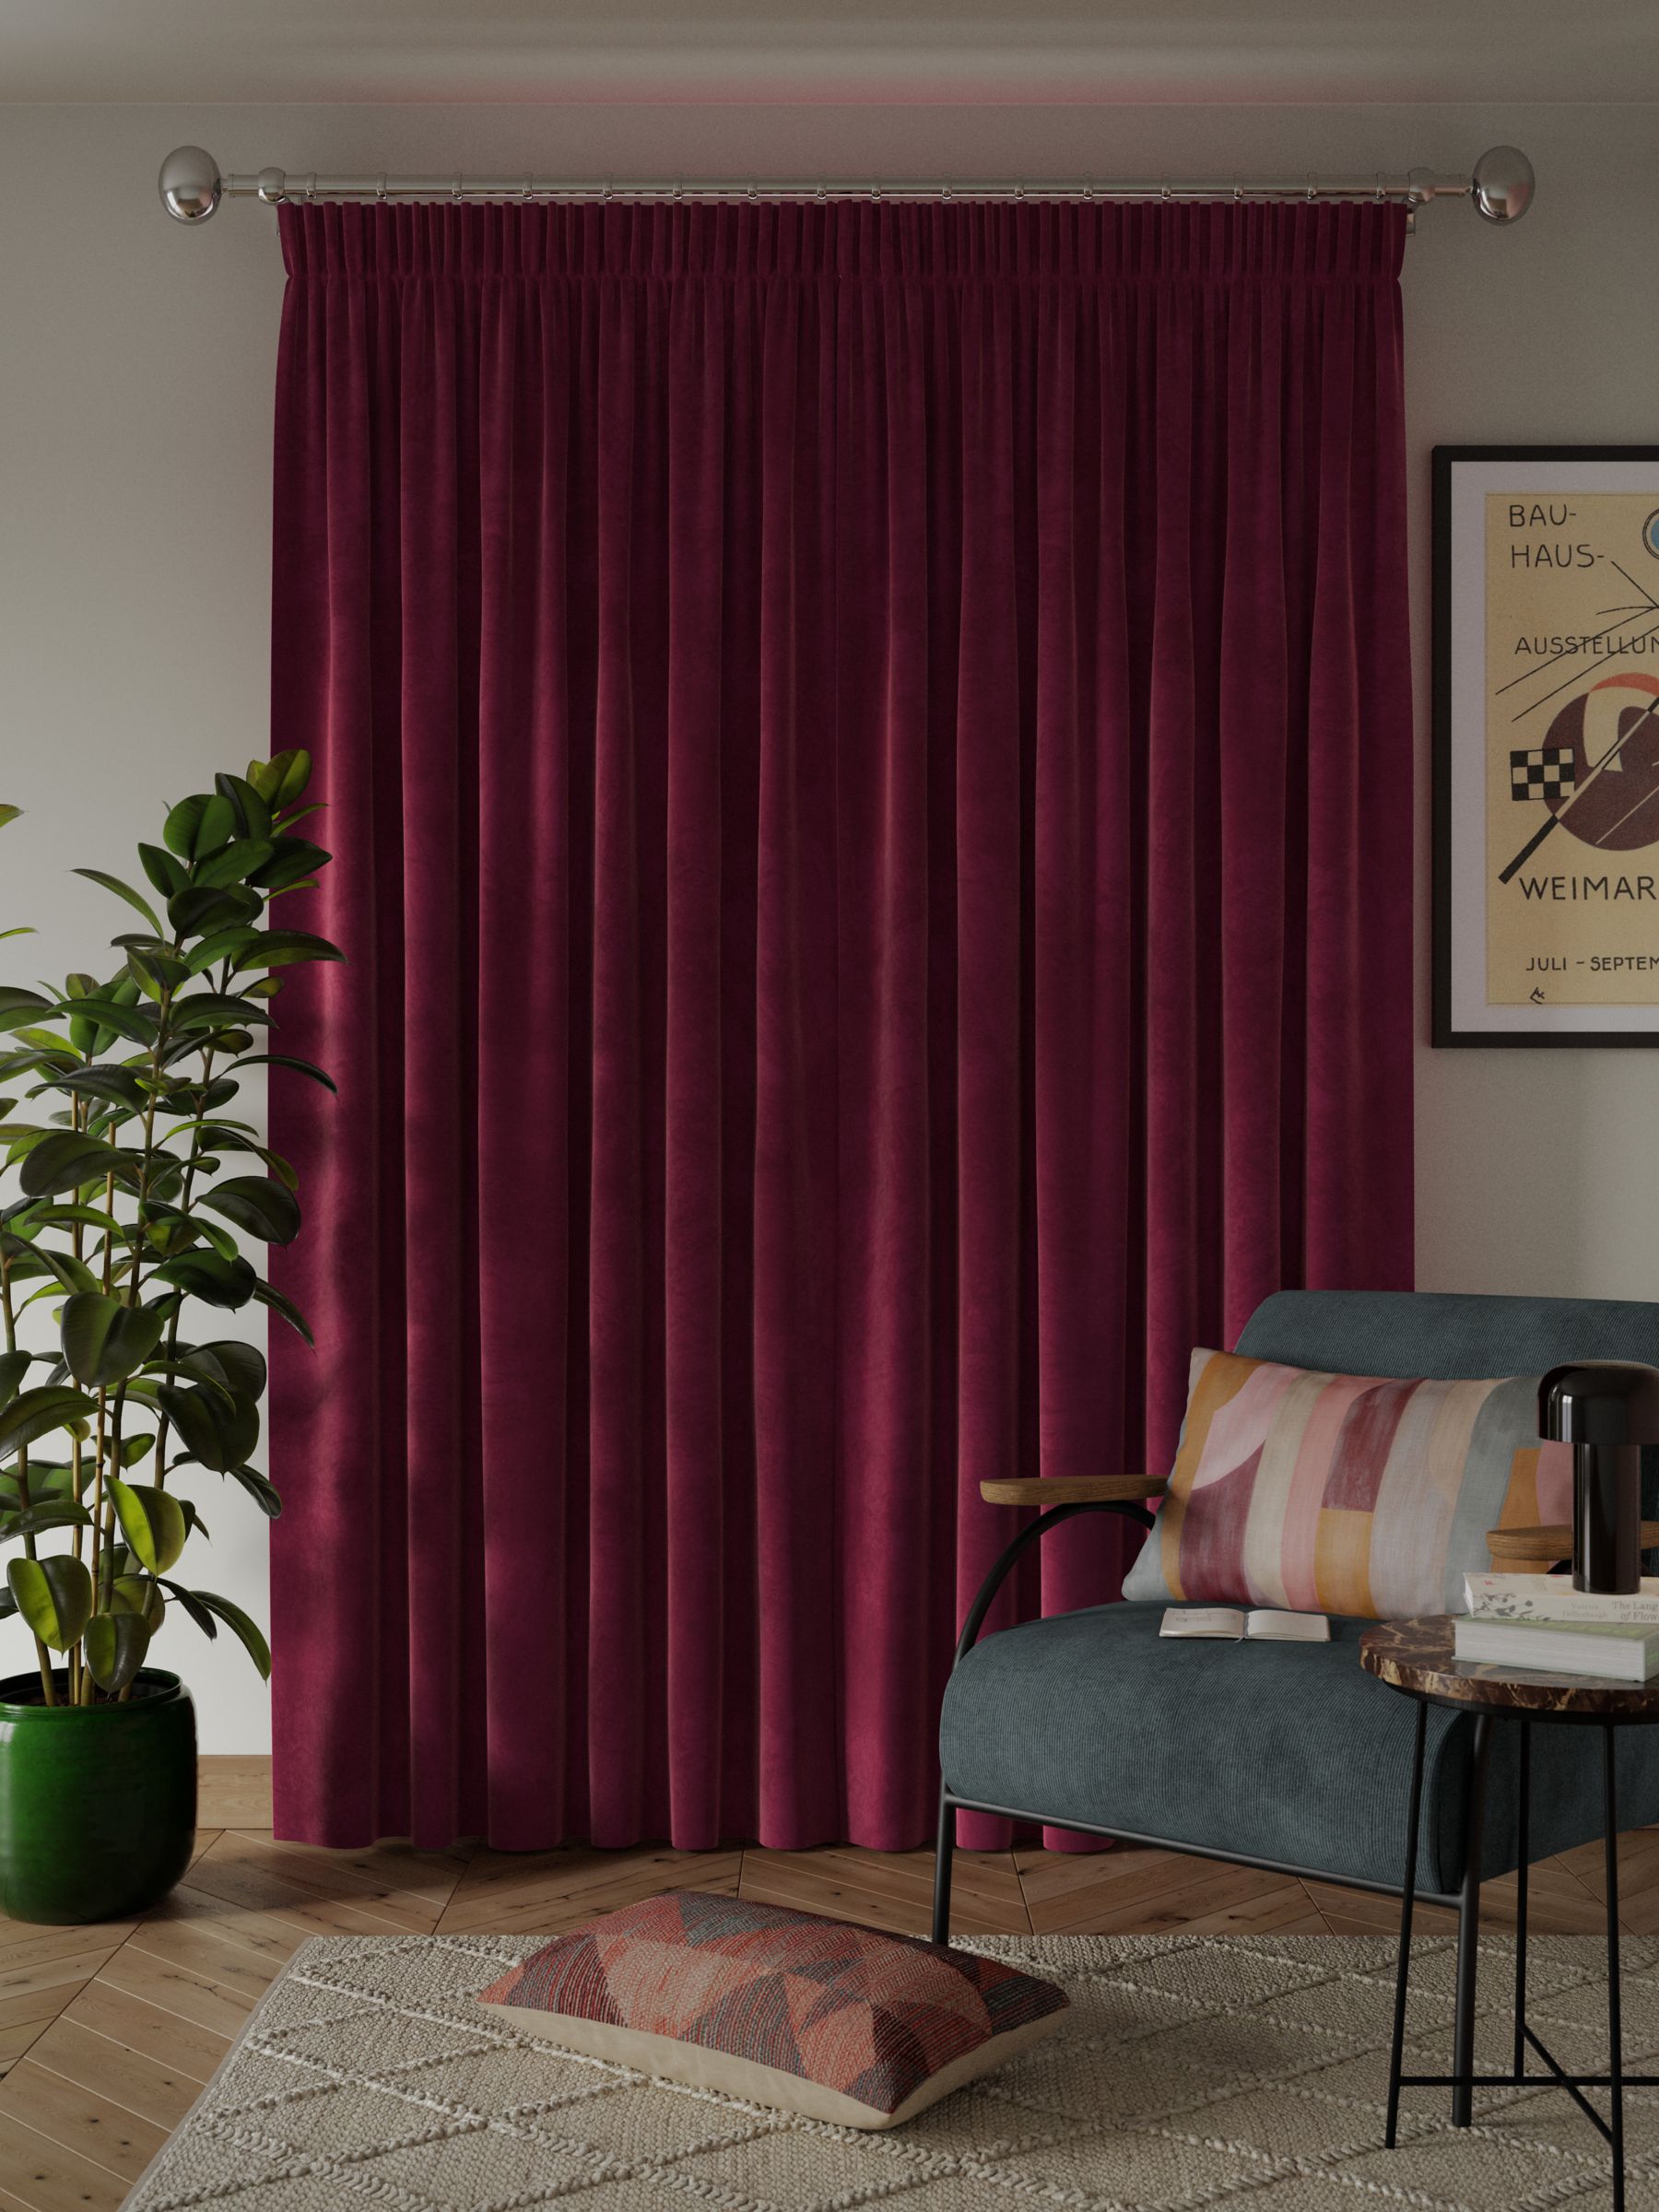 Clever velvet lined pencil pleat single door curtain in wine, burgundy,  So'home